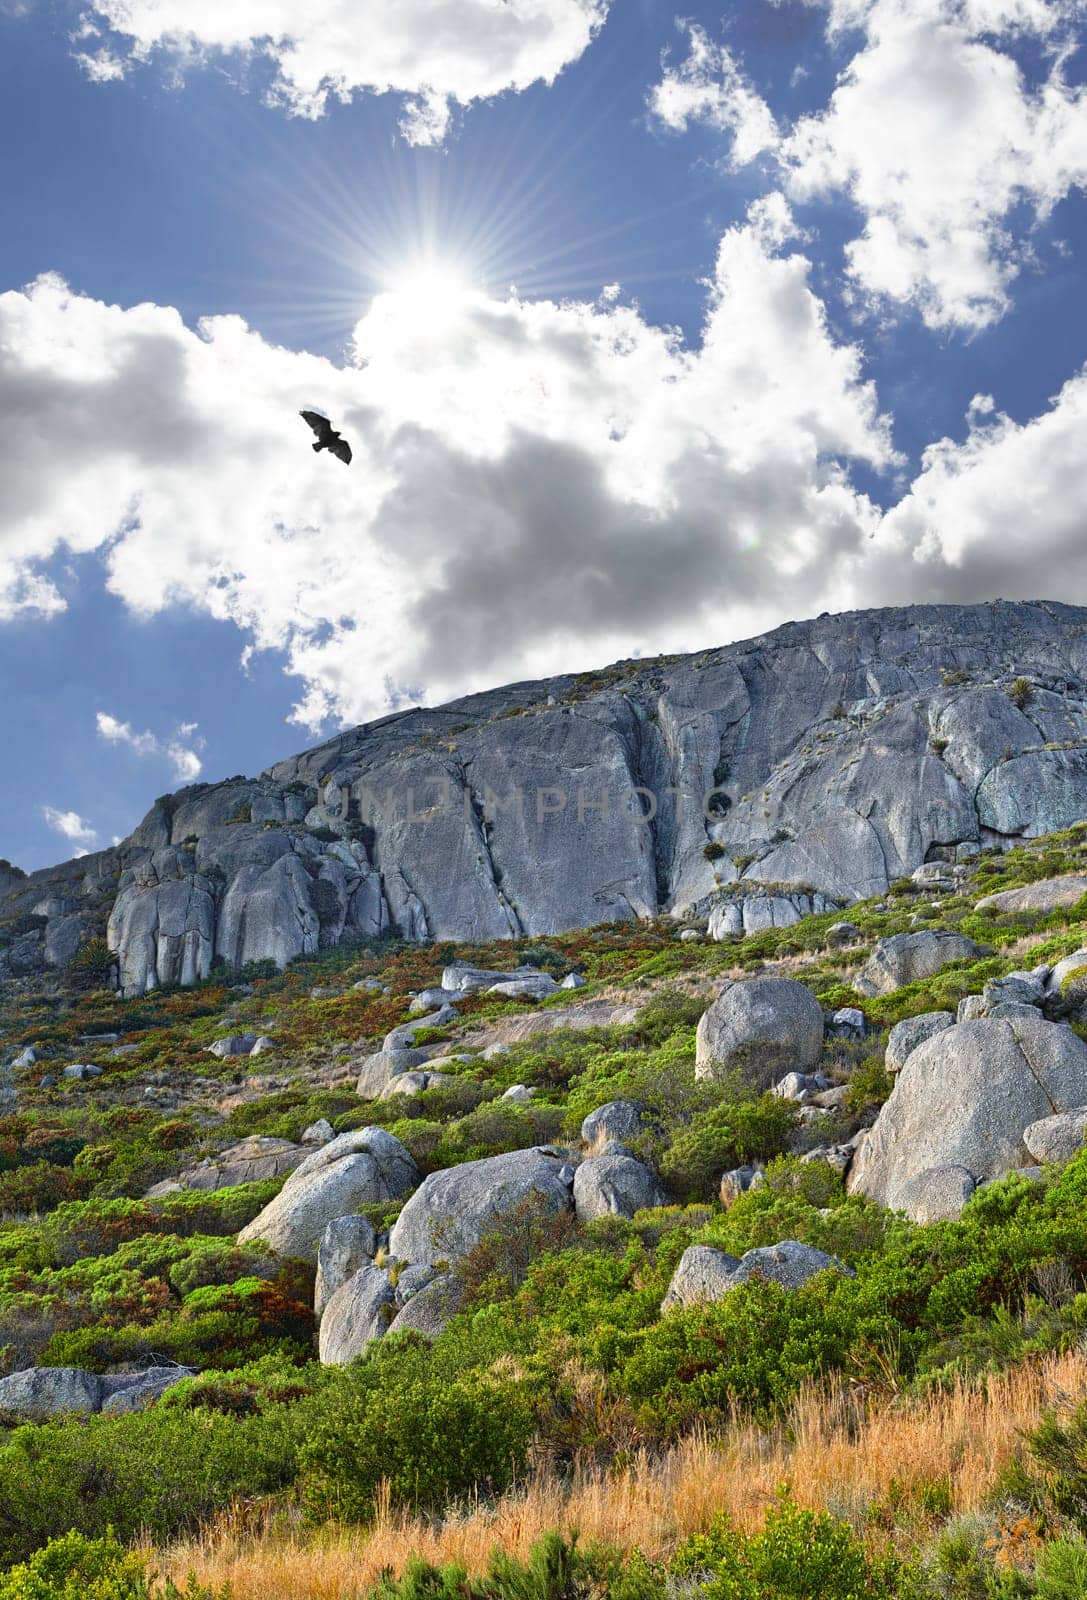 Mountain, sun and natural landscape with cloudy sky, bird in flight and summer peak at travel location. Nature, cliff and sustainable environment with earth, rocks and bush at holiday destination.